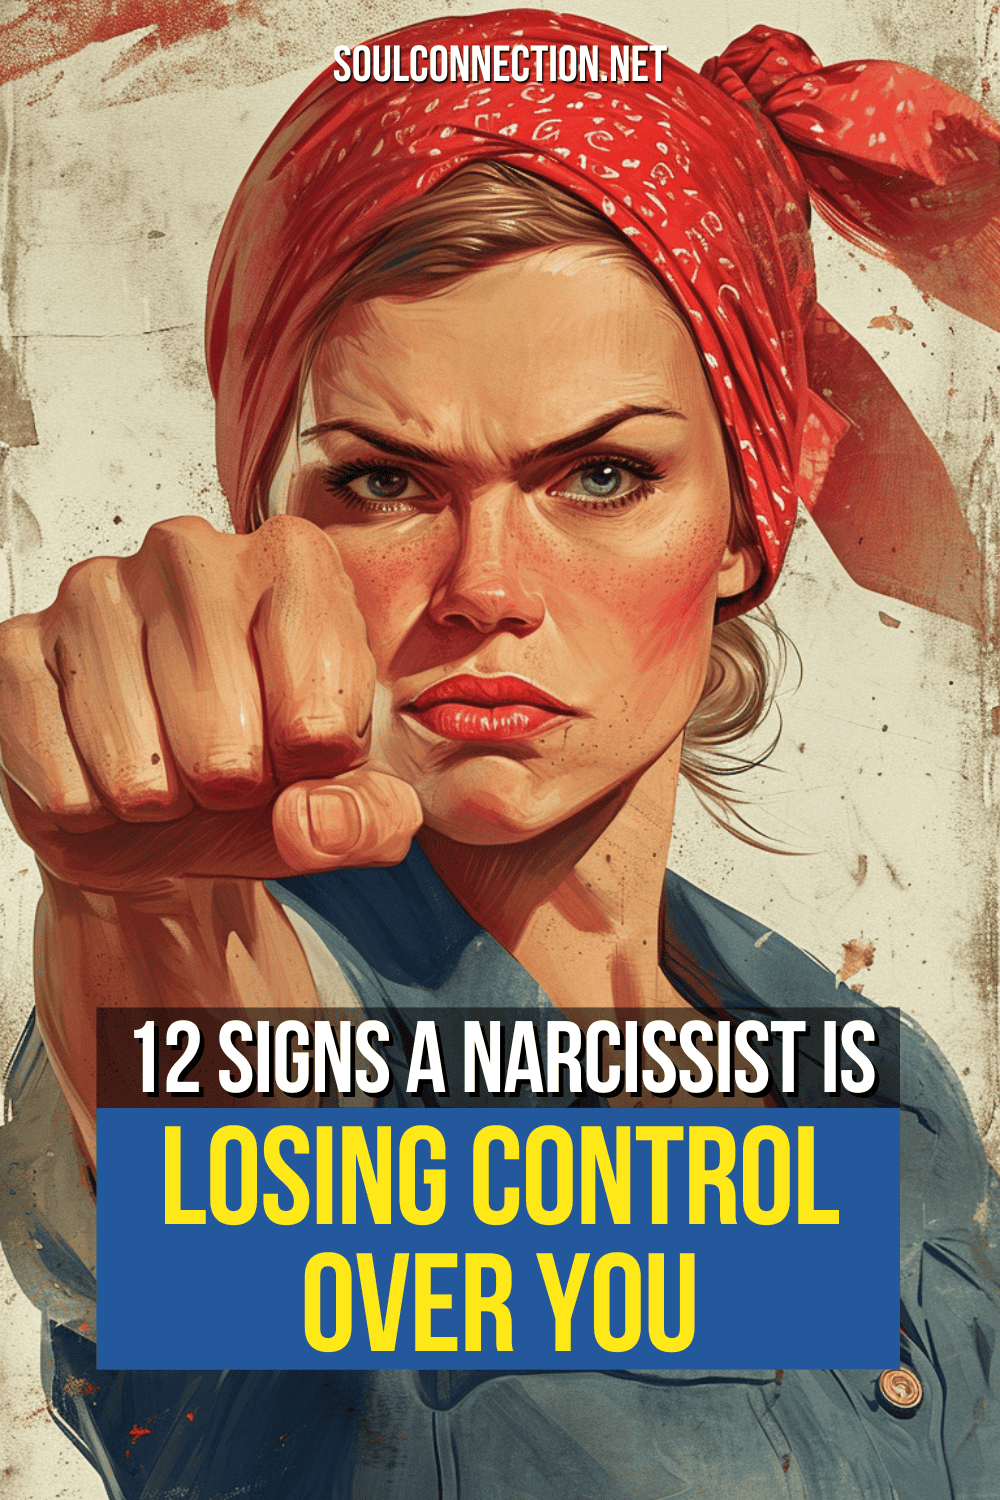 Empowered woman with clenched fist, highlighting signs a narcissist losing control.